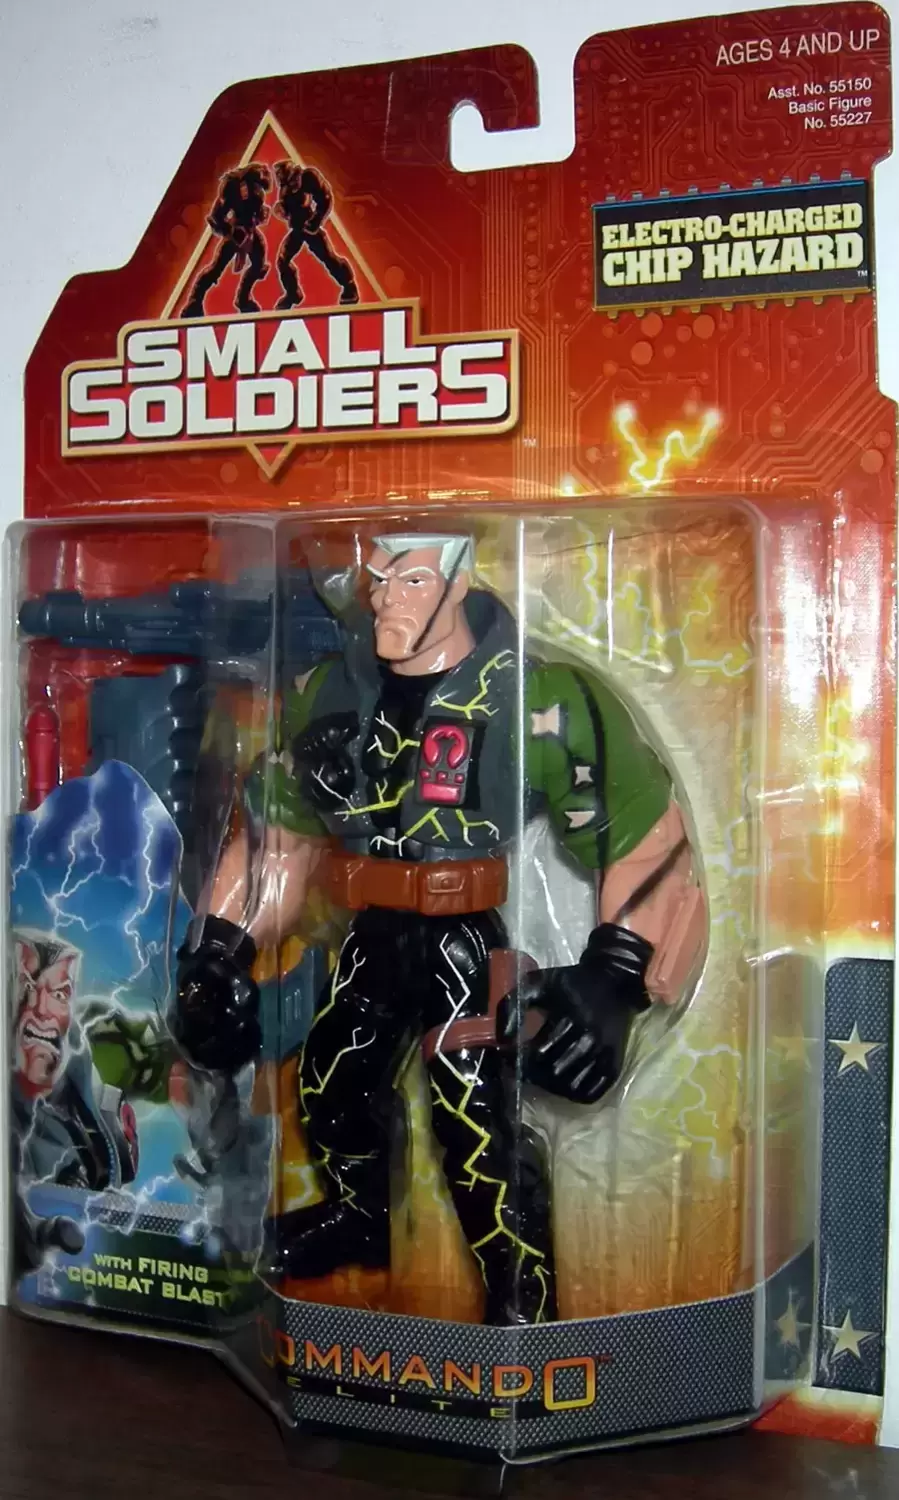 Small Soldiers - Chip Hazard Electro-Charged